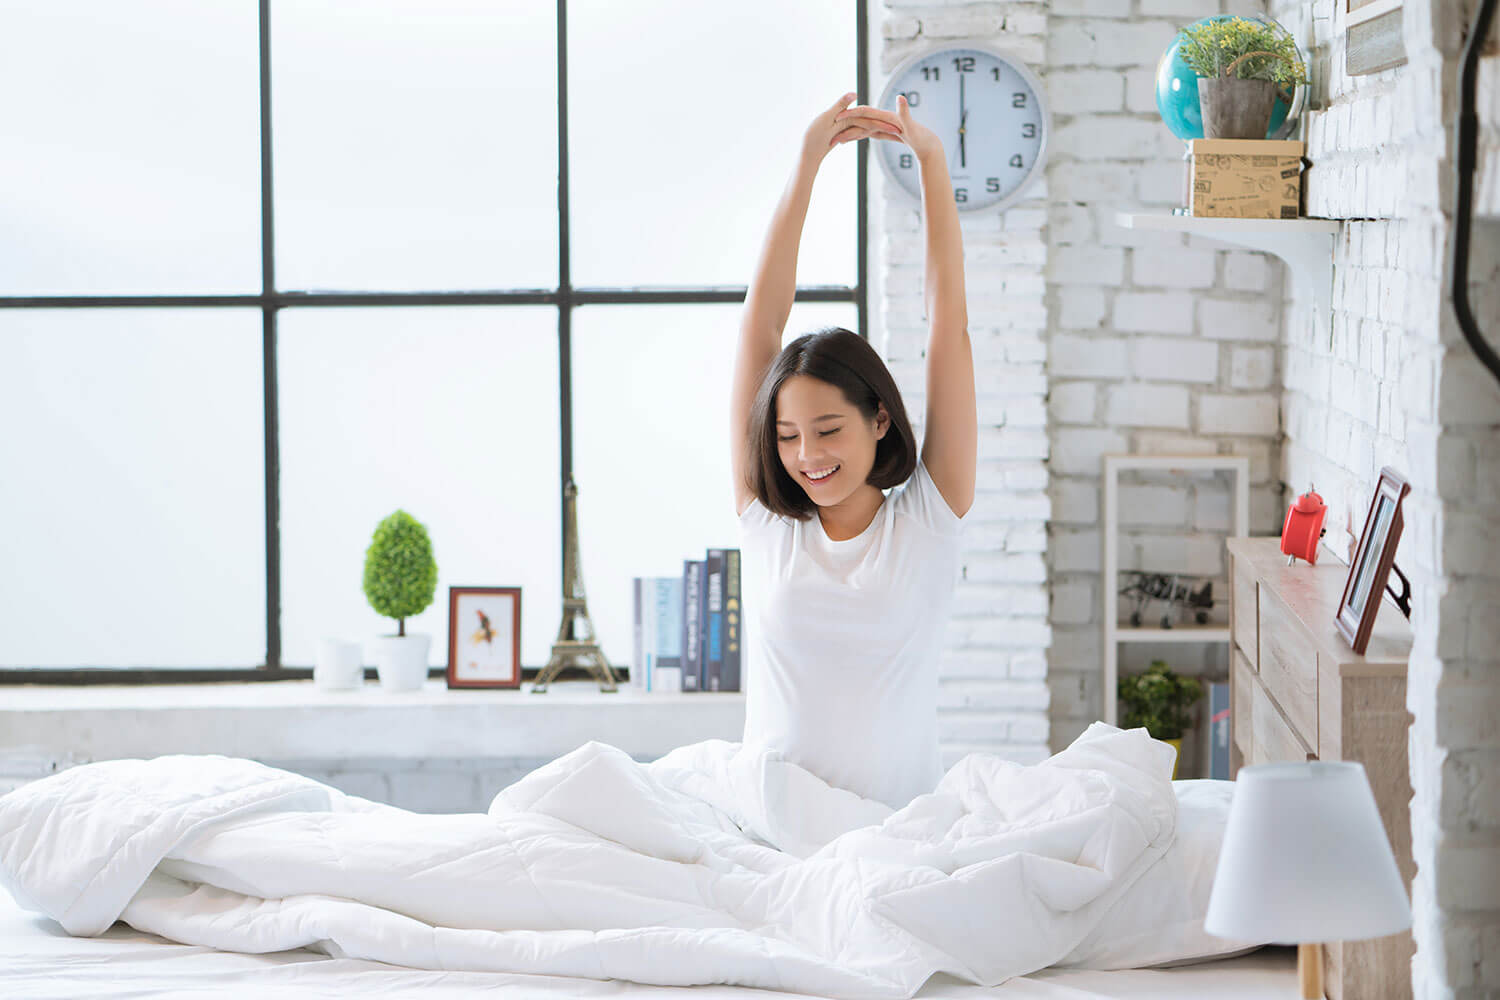 What's Healthier: Morning Exercise or More Sleep?